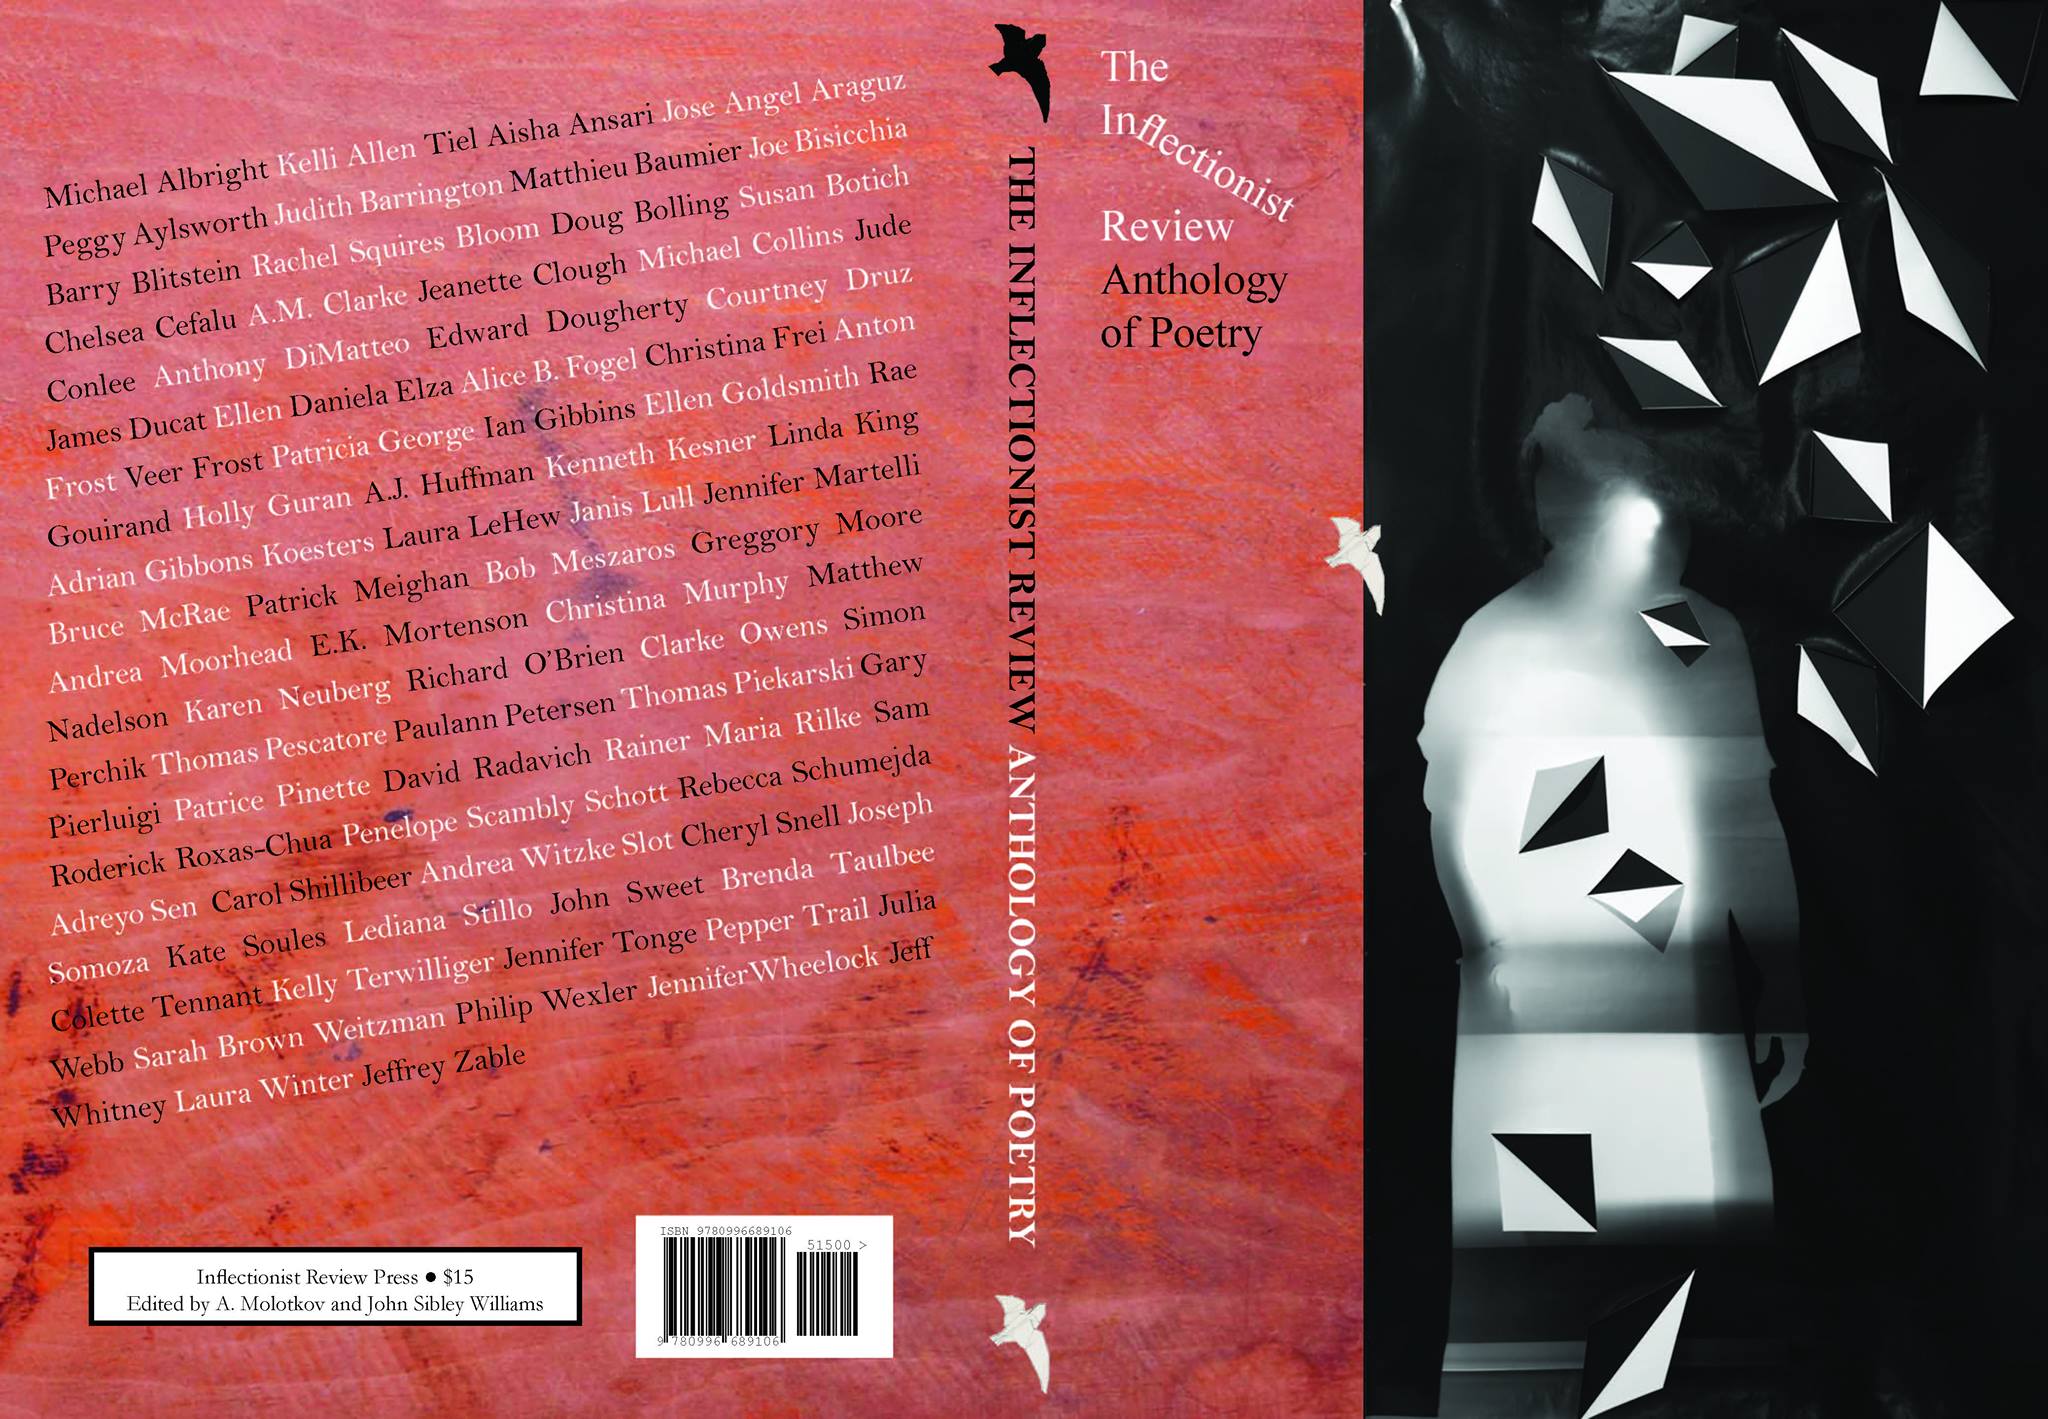 Inflectionist Review Anthology of Poetry